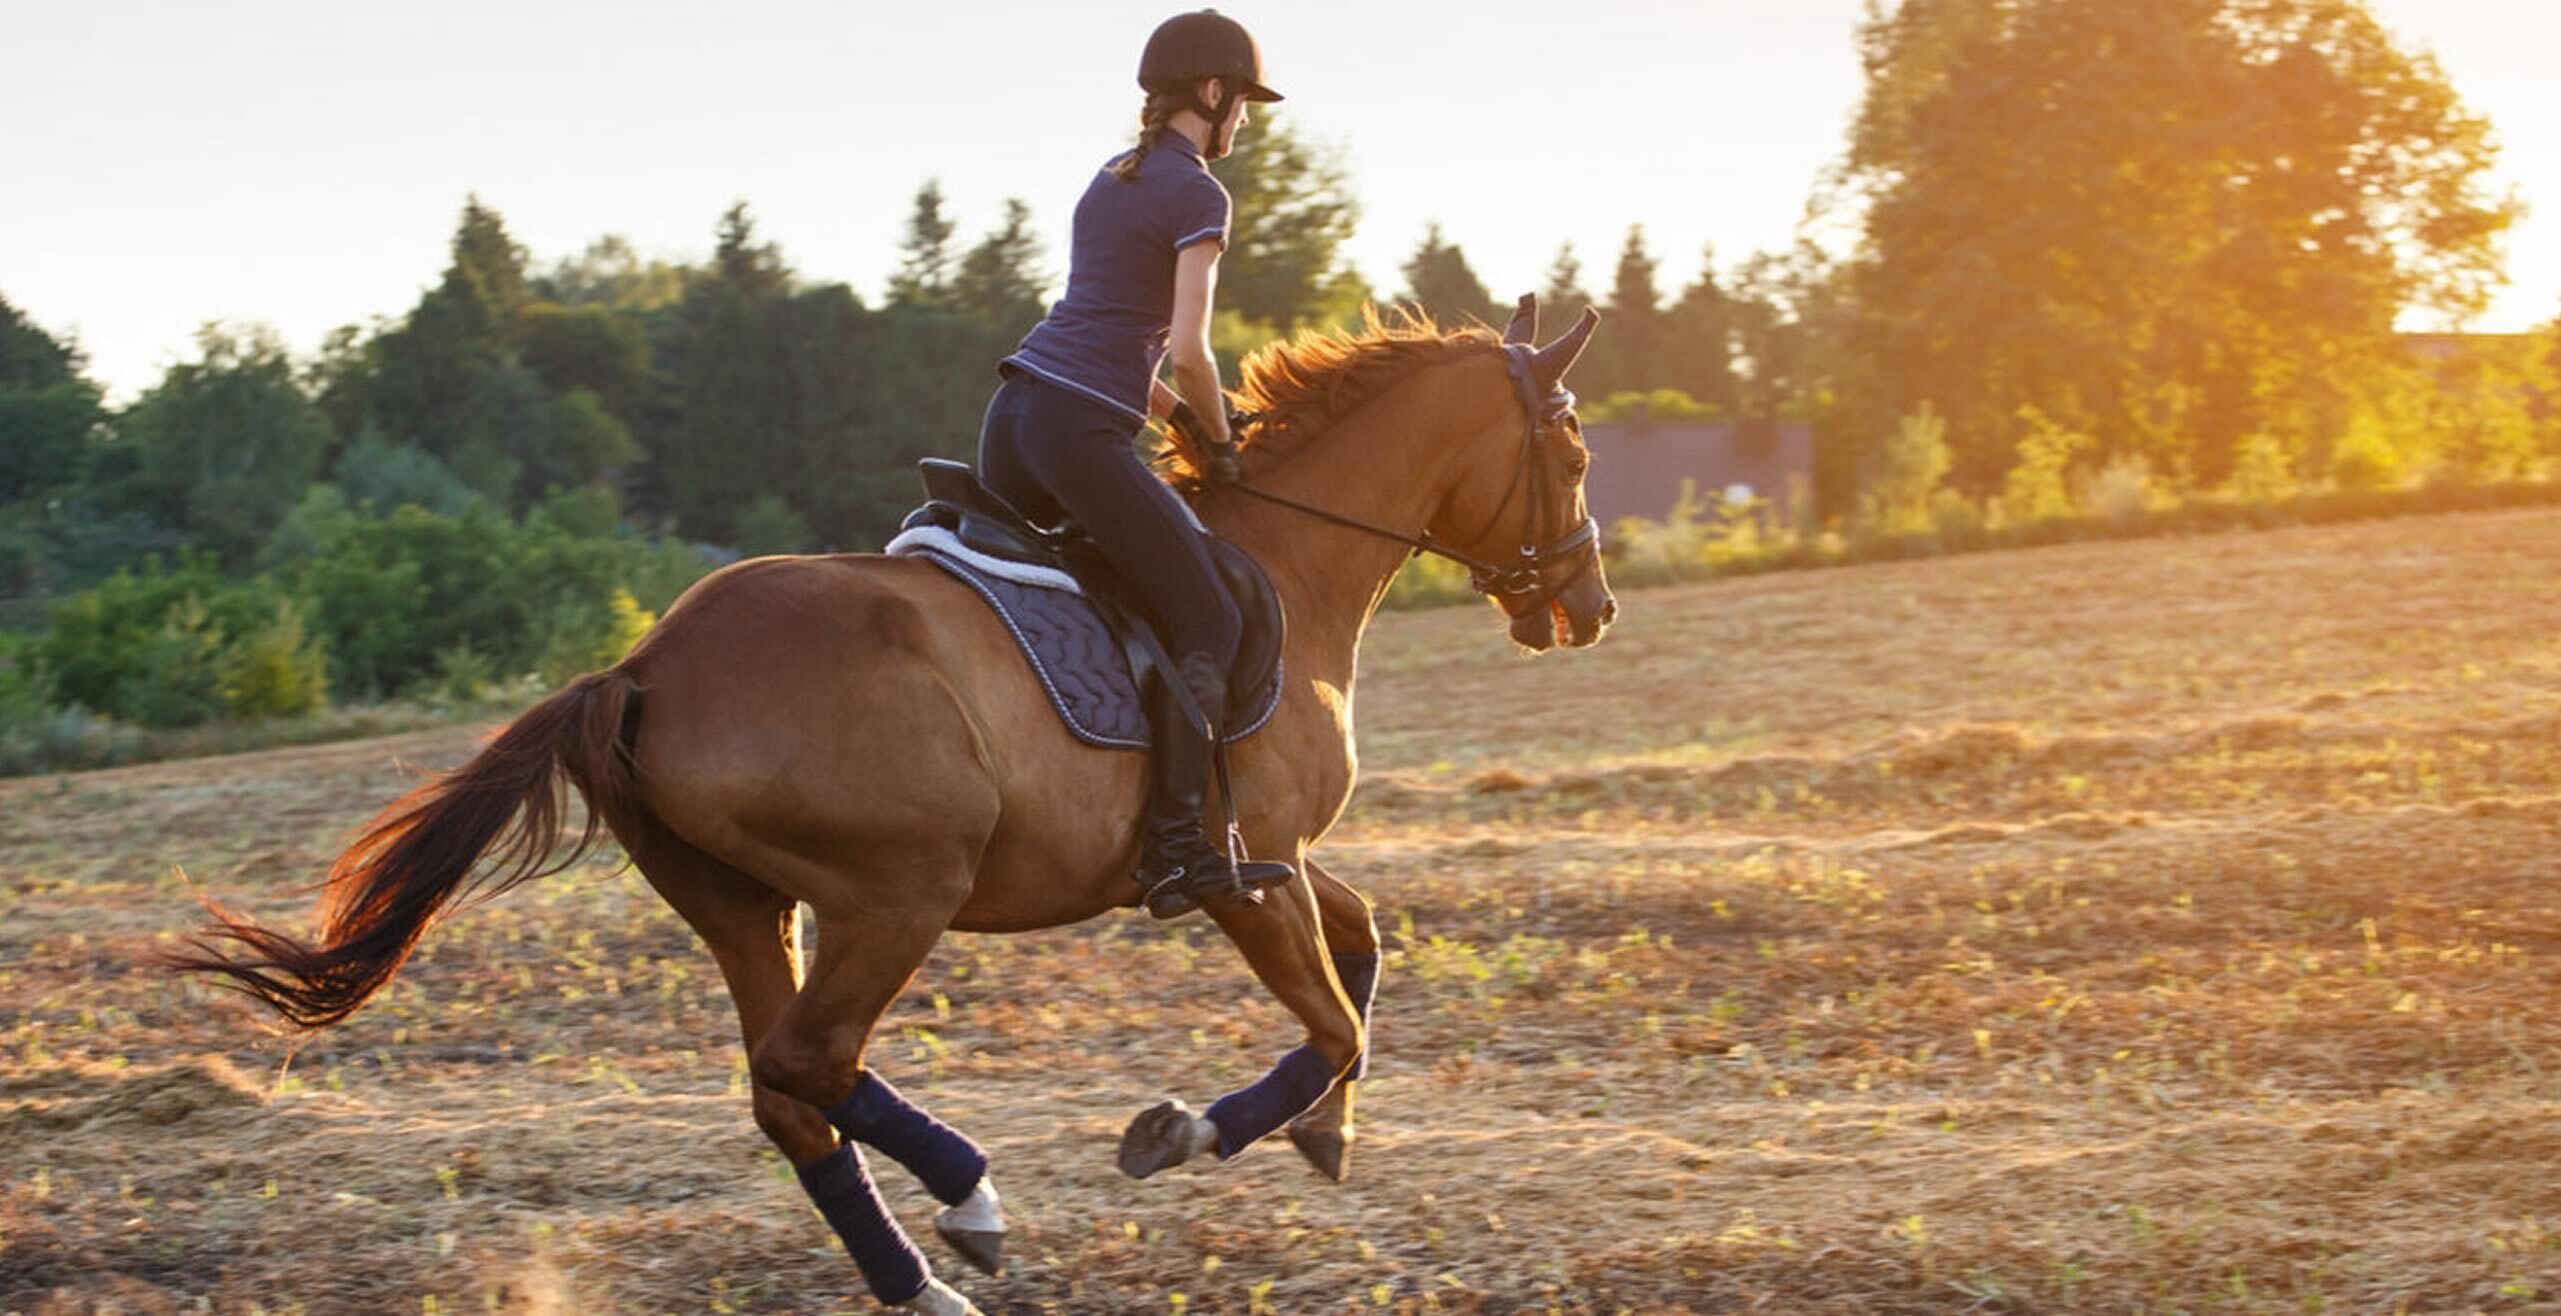 Best Horse Riding Experiences and Lessons Around The World